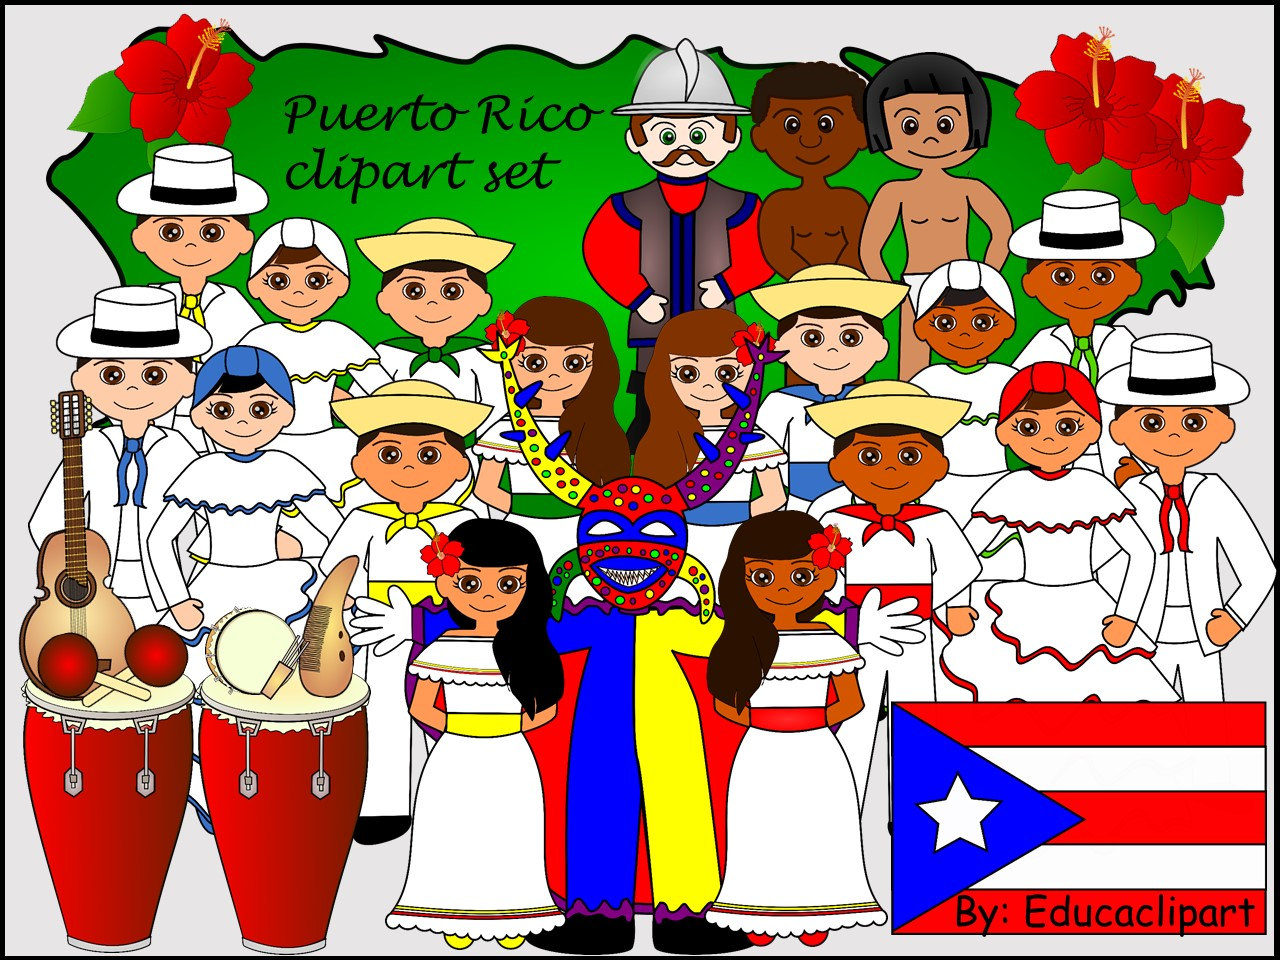 Puerto Rico clipart #8, Download drawings